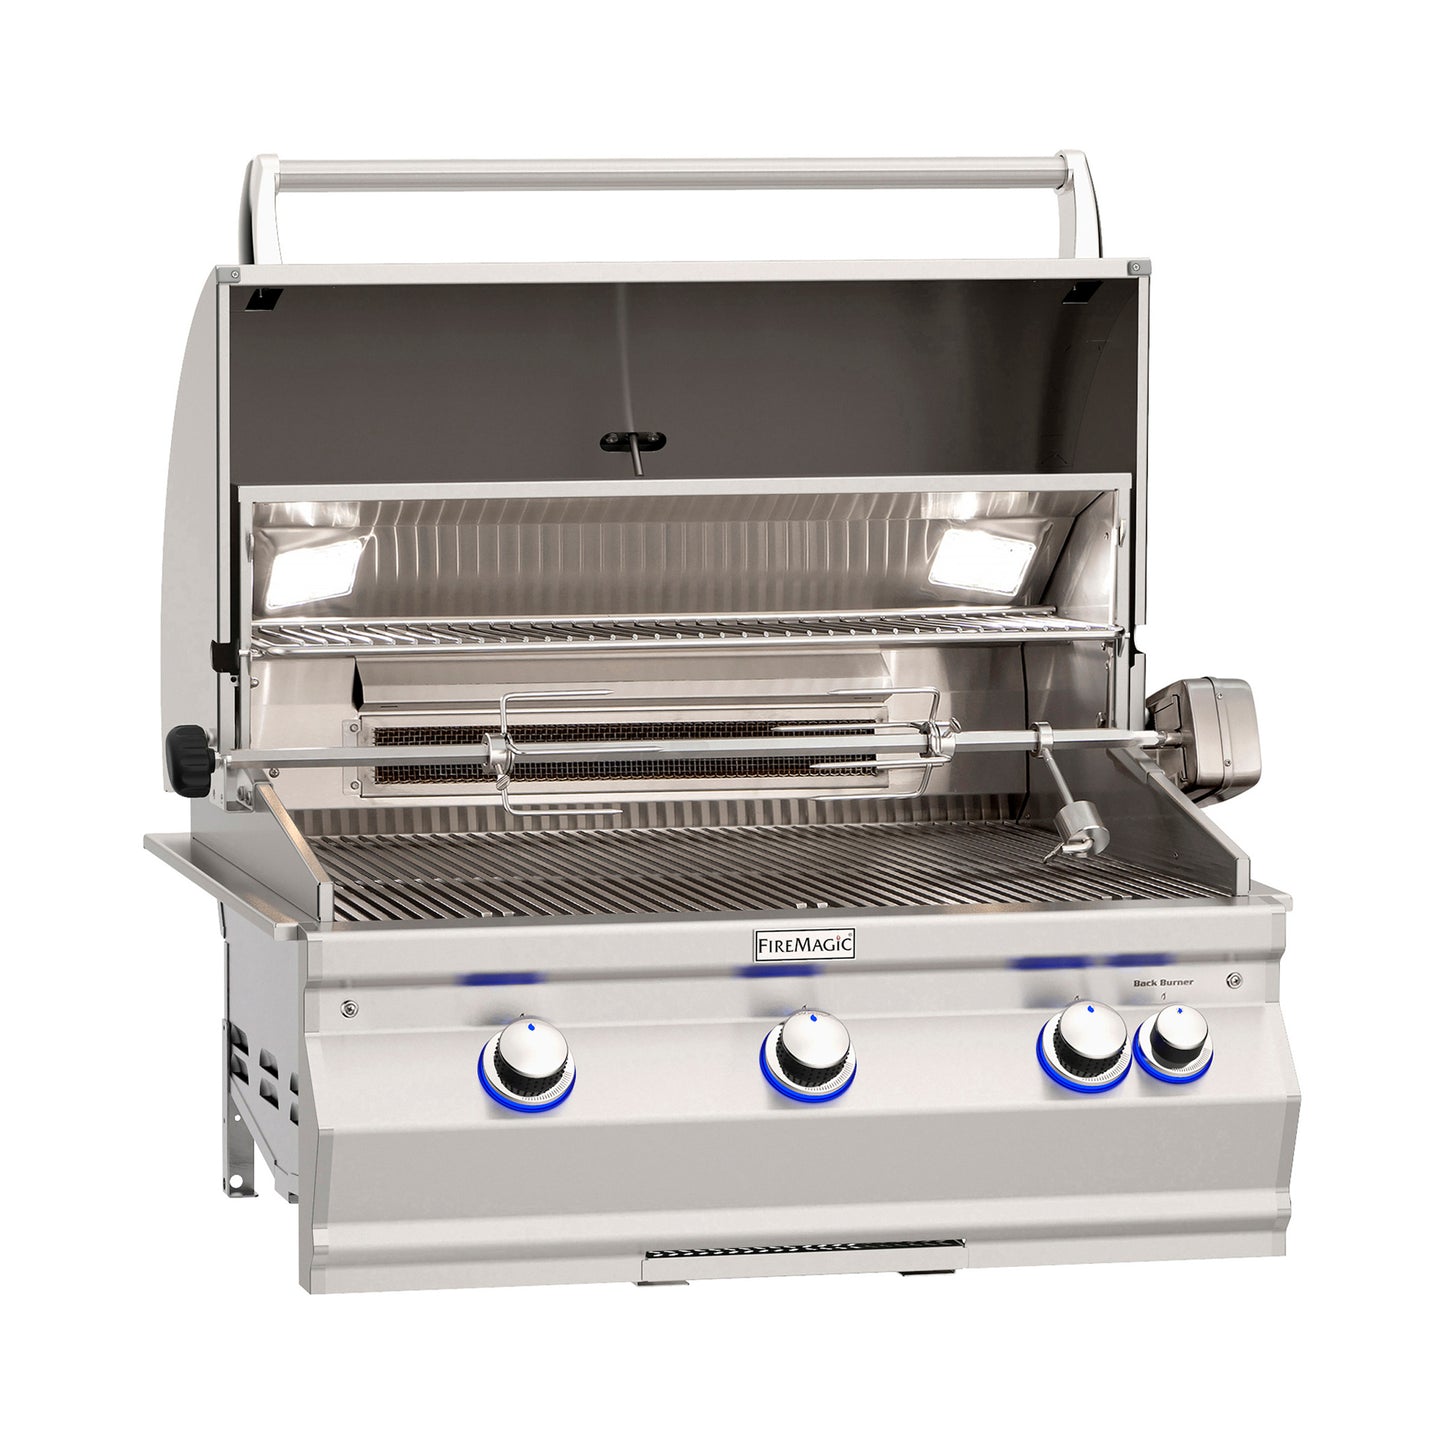 FireMagic Aurora A660i Built-In 30 in. Grill with Analog Thermometer